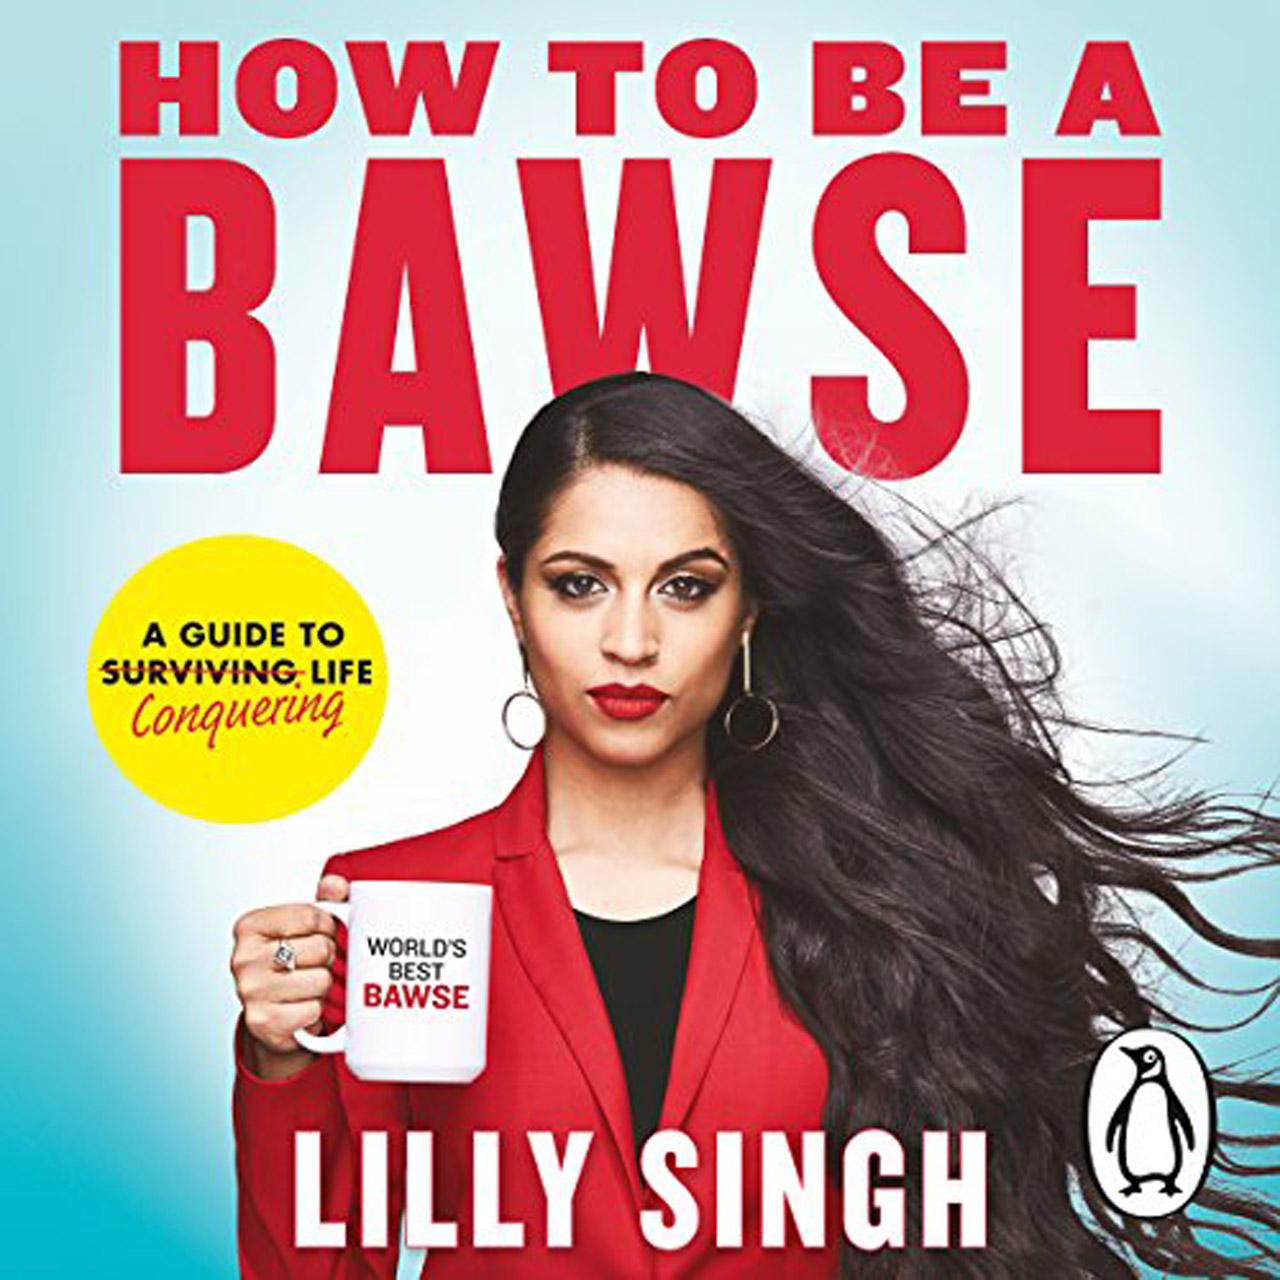 Lilly Singh - How To Be A Bawse
From actress, comedian and YouTube sensation Lilly Singh (aka Superwoman) comes the definitive guide to being a BAWSE - a person who exudes confidence, reaches goals, gets hurt efficiently, and smiles genuinely, because they've fought through it all and made it out the other side. Narrated in her hilarious, bold voice that's inspired millions of fans, and sharing stories from her own life to illustrate her message, Lilly proves that there are no shortcuts to success. 